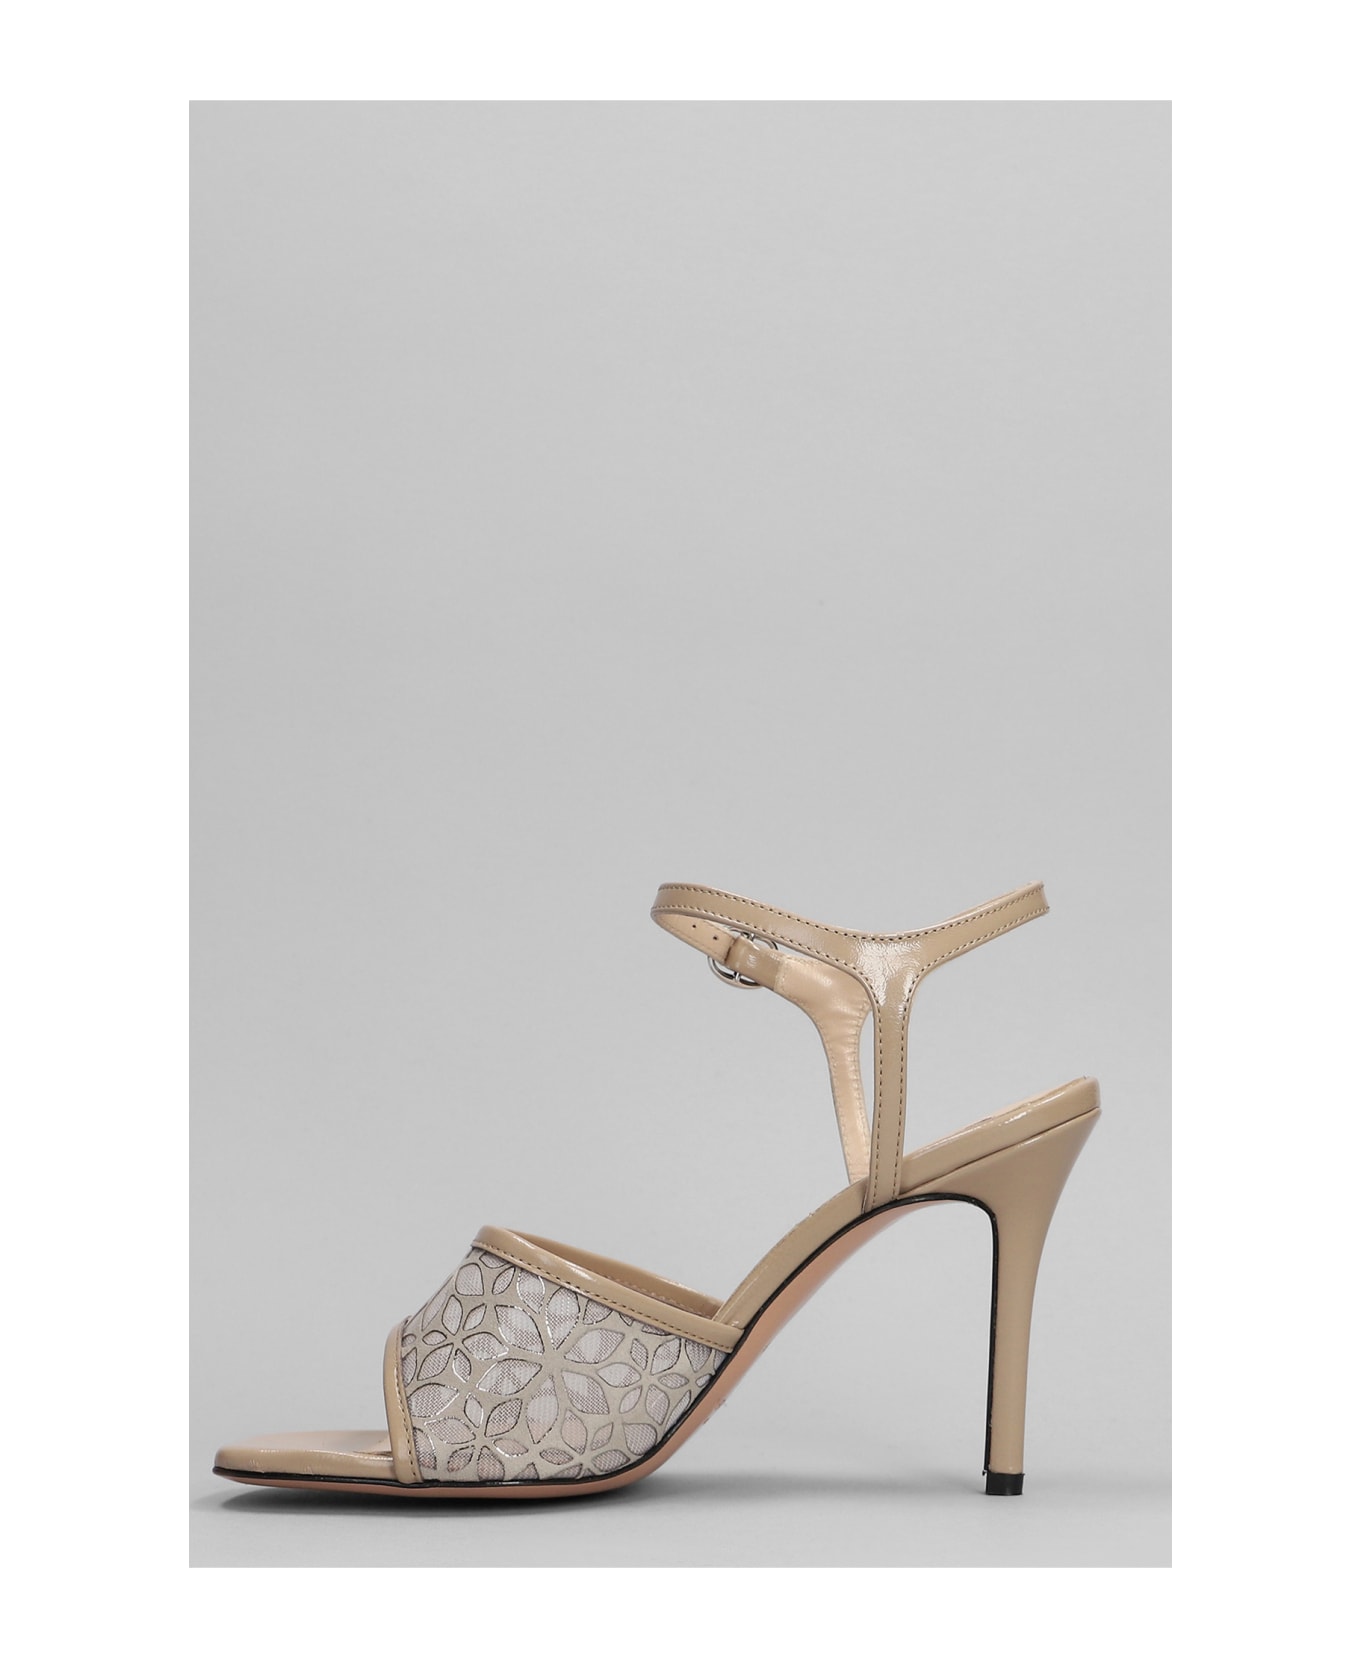 Marc Ellis Sandals In Taupe Patent Leather - taupe サンダル